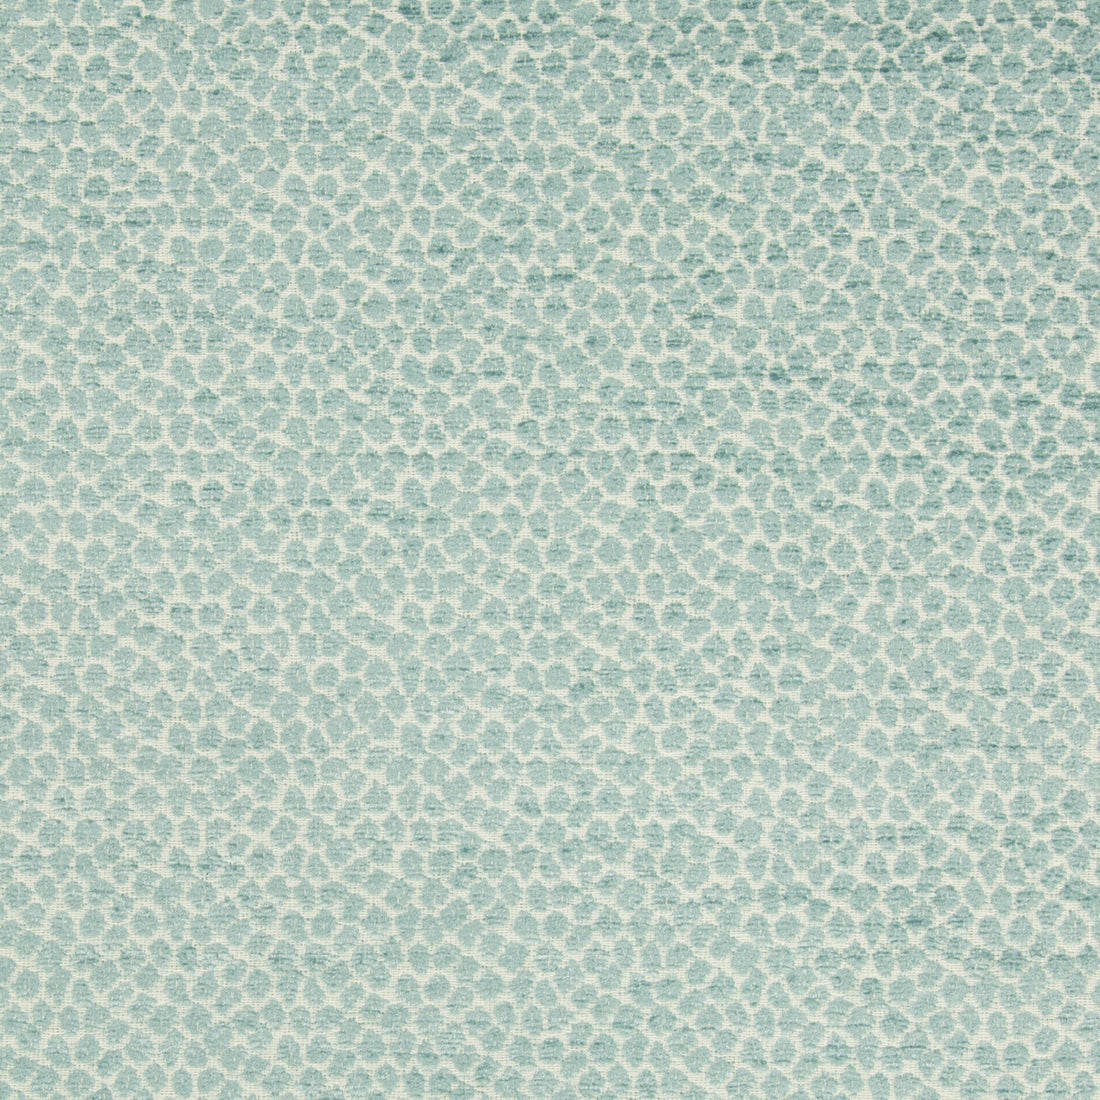 Kravet Contract fabric in 34745-15 color - pattern 34745.15.0 - by Kravet Contract in the Crypton Home collection